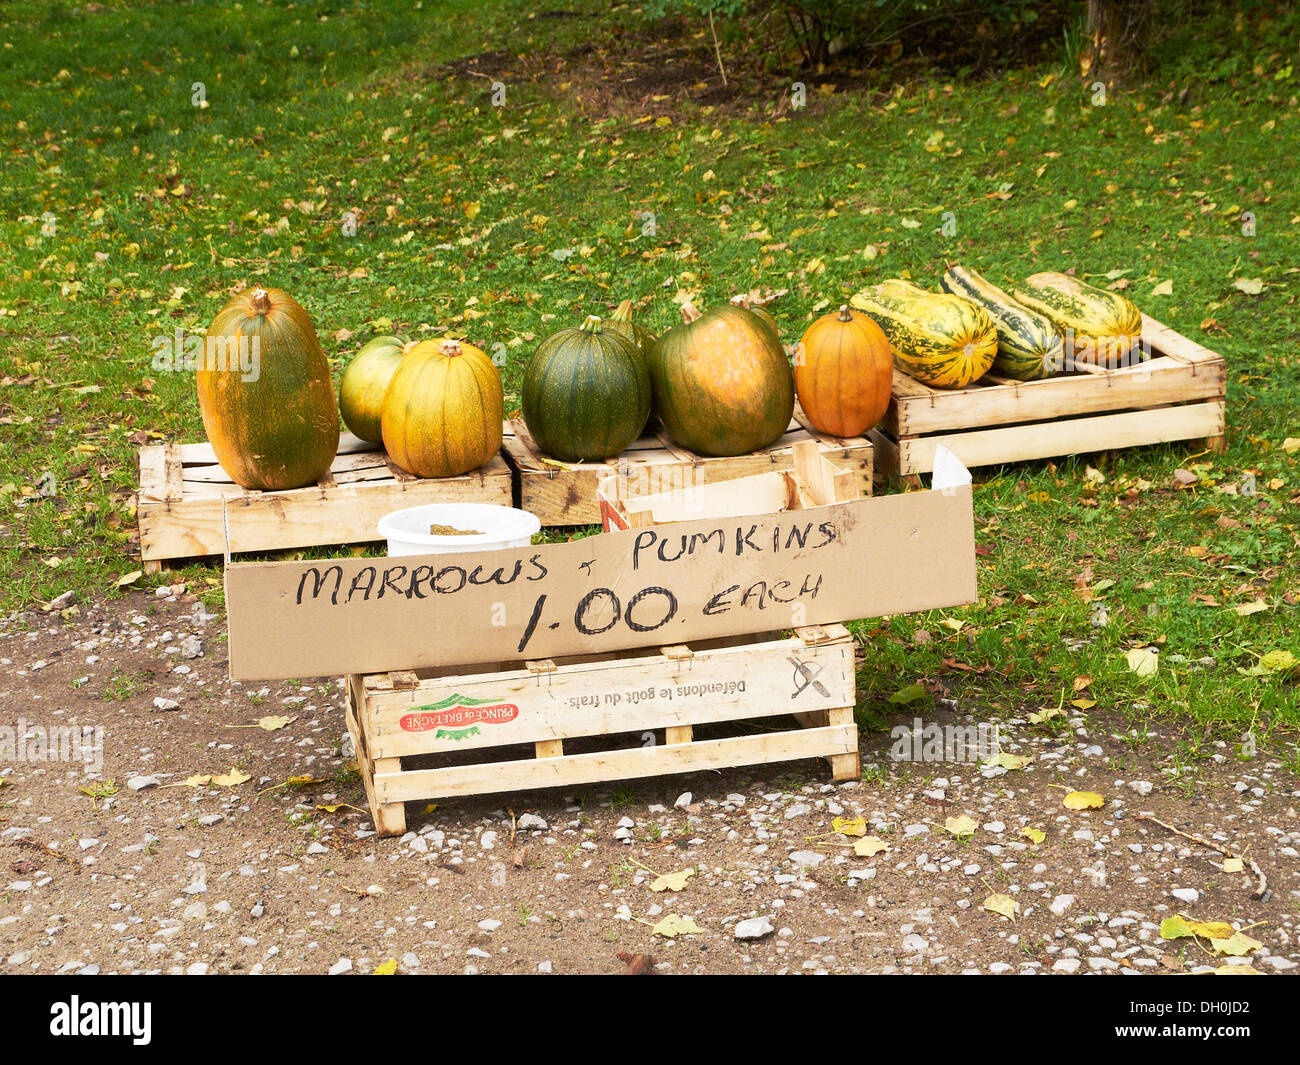 For sale marrows and pumpkins at the site of the road in Cheshire UK Stock Photo